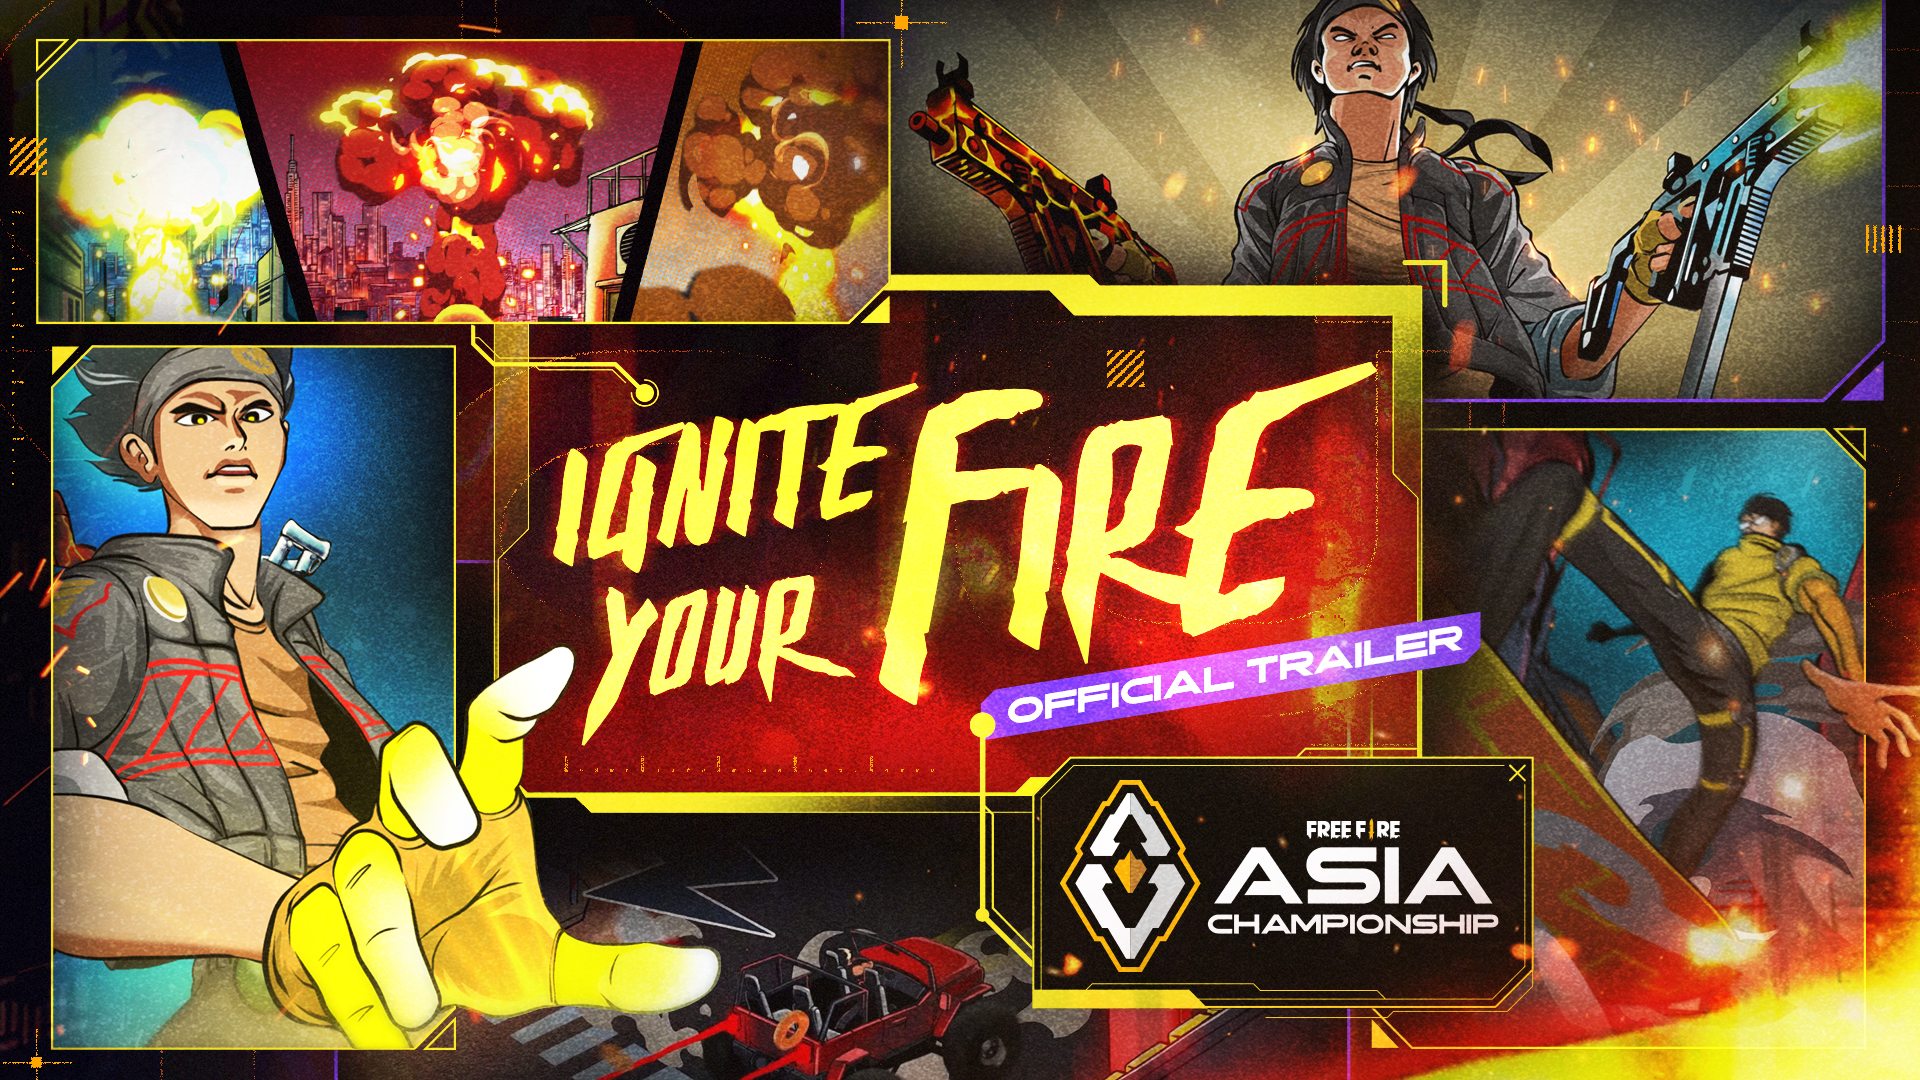 Ignite Your Fire | FFAC Official Trailer | Free Fire Esports